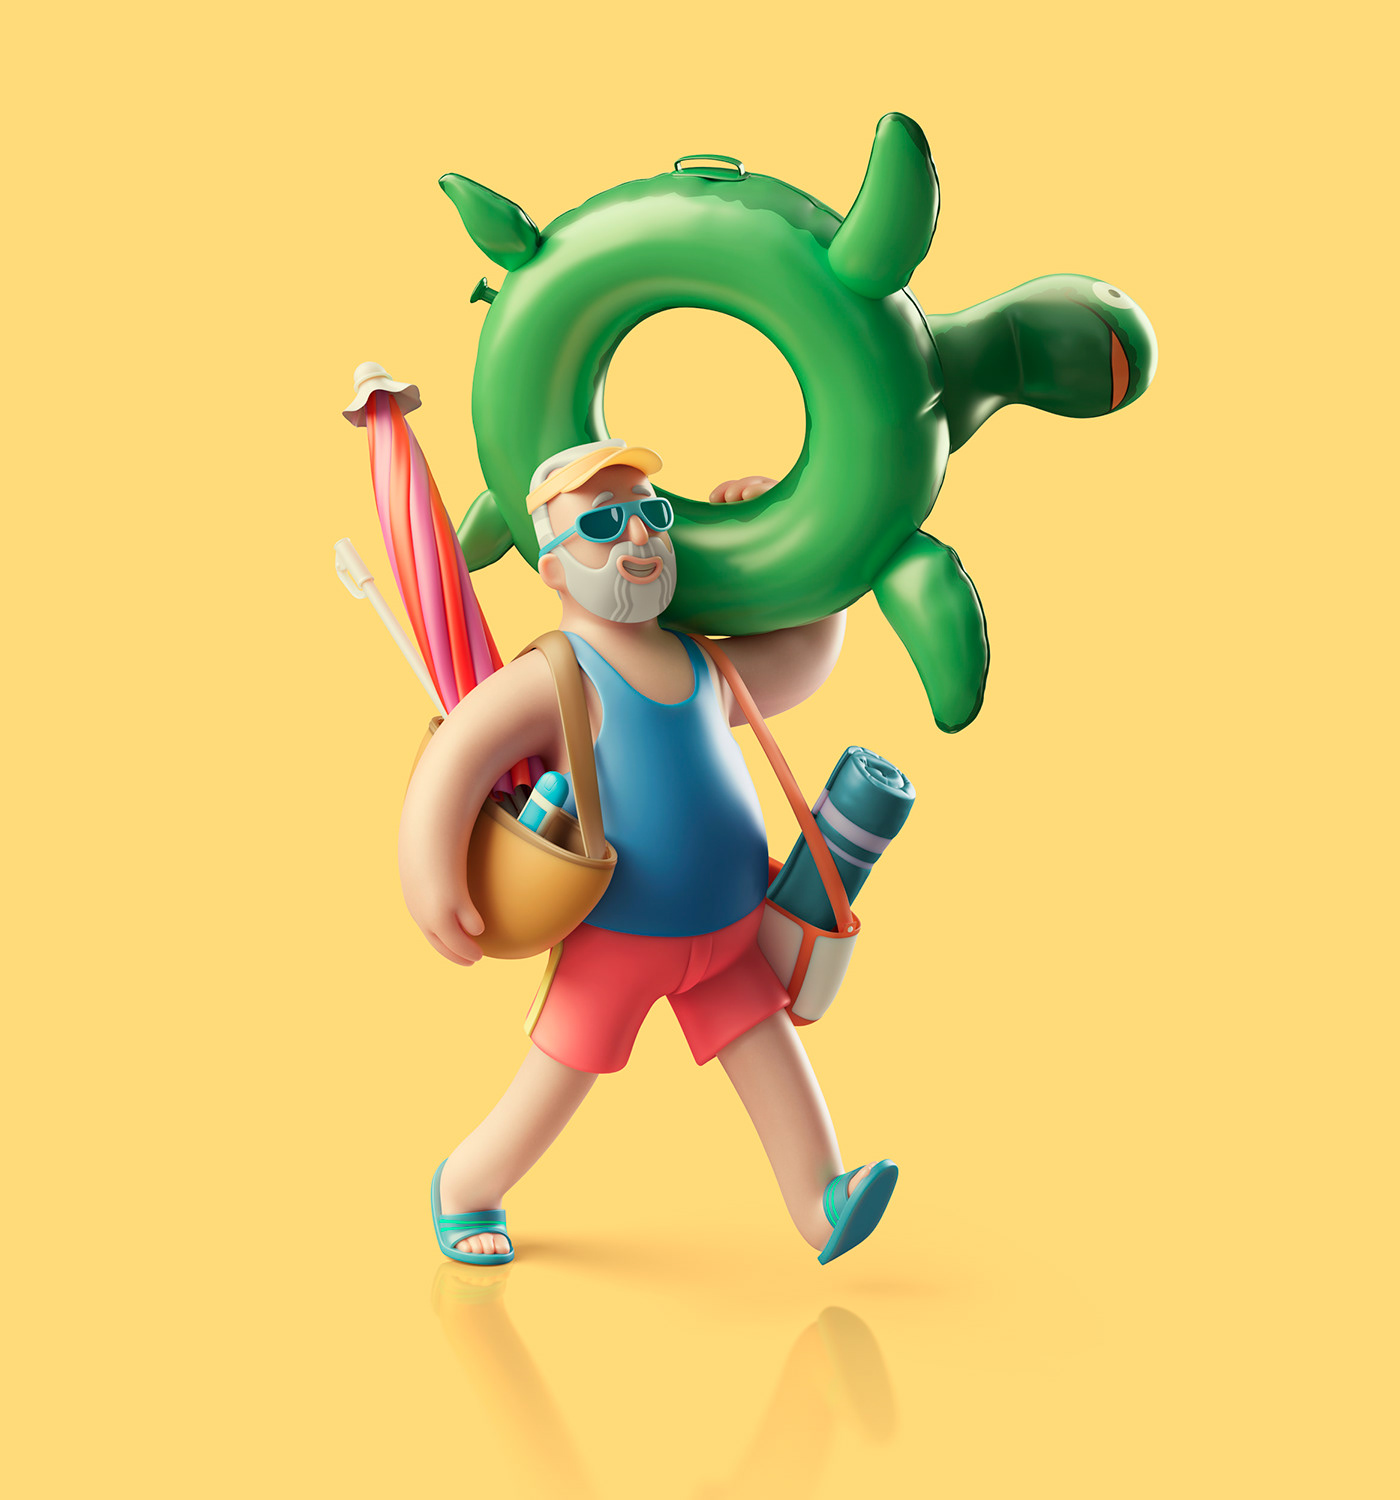 3D 3D MOVIE Advertising  animation  Character design  concept images estudioicone icone Still 2д